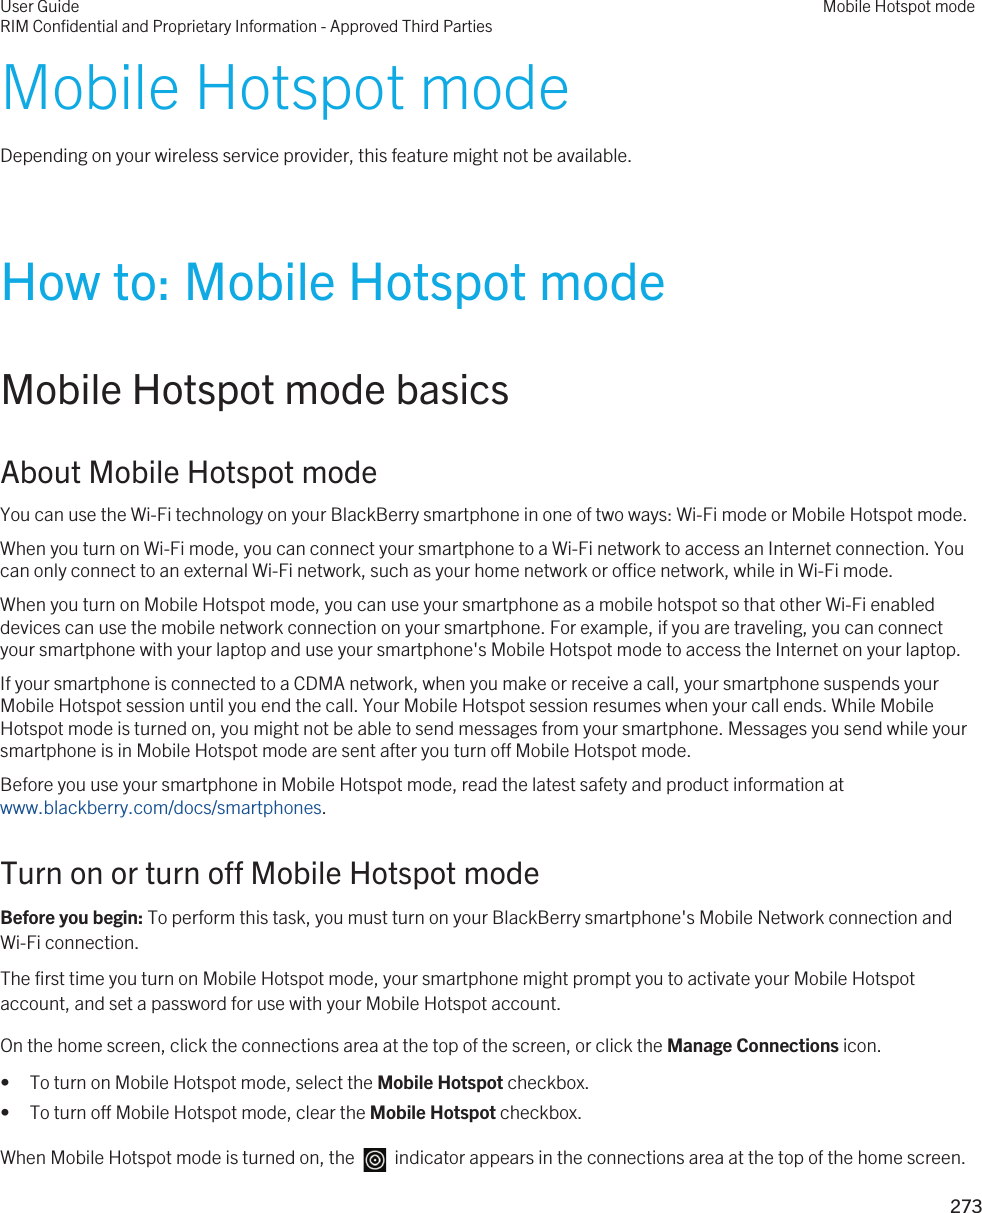 Mobile Hotspot modeDepending on your wireless service provider, this feature might not be available.How to: Mobile Hotspot modeMobile Hotspot mode basicsAbout Mobile Hotspot modeYou can use the Wi-Fi technology on your BlackBerry smartphone in one of two ways: Wi-Fi mode or Mobile Hotspot mode.When you turn on Wi-Fi mode, you can connect your smartphone to a Wi-Fi network to access an Internet connection. You can only connect to an external Wi-Fi network, such as your home network or office network, while in Wi-Fi mode.When you turn on Mobile Hotspot mode, you can use your smartphone as a mobile hotspot so that other Wi-Fi enabled devices can use the mobile network connection on your smartphone. For example, if you are traveling, you can connect your smartphone with your laptop and use your smartphone&apos;s Mobile Hotspot mode to access the Internet on your laptop.If your smartphone is connected to a CDMA network, when you make or receive a call, your smartphone suspends your Mobile Hotspot session until you end the call. Your Mobile Hotspot session resumes when your call ends. While Mobile Hotspot mode is turned on, you might not be able to send messages from your smartphone. Messages you send while your smartphone is in Mobile Hotspot mode are sent after you turn off Mobile Hotspot mode.Before you use your smartphone in Mobile Hotspot mode, read the latest safety and product information at www.blackberry.com/docs/smartphones.Turn on or turn off Mobile Hotspot modeBefore you begin: To perform this task, you must turn on your BlackBerry smartphone&apos;s Mobile Network connection and Wi-Fi connection.The first time you turn on Mobile Hotspot mode, your smartphone might prompt you to activate your Mobile Hotspot account, and set a password for use with your Mobile Hotspot account.On the home screen, click the connections area at the top of the screen, or click the Manage Connections icon.• To turn on Mobile Hotspot mode, select the Mobile Hotspot checkbox.• To turn off Mobile Hotspot mode, clear the Mobile Hotspot checkbox.When Mobile Hotspot mode is turned on, the    indicator appears in the connections area at the top of the home screen.User GuideRIM Confidential and Proprietary Information - Approved Third PartiesMobile Hotspot mode273 